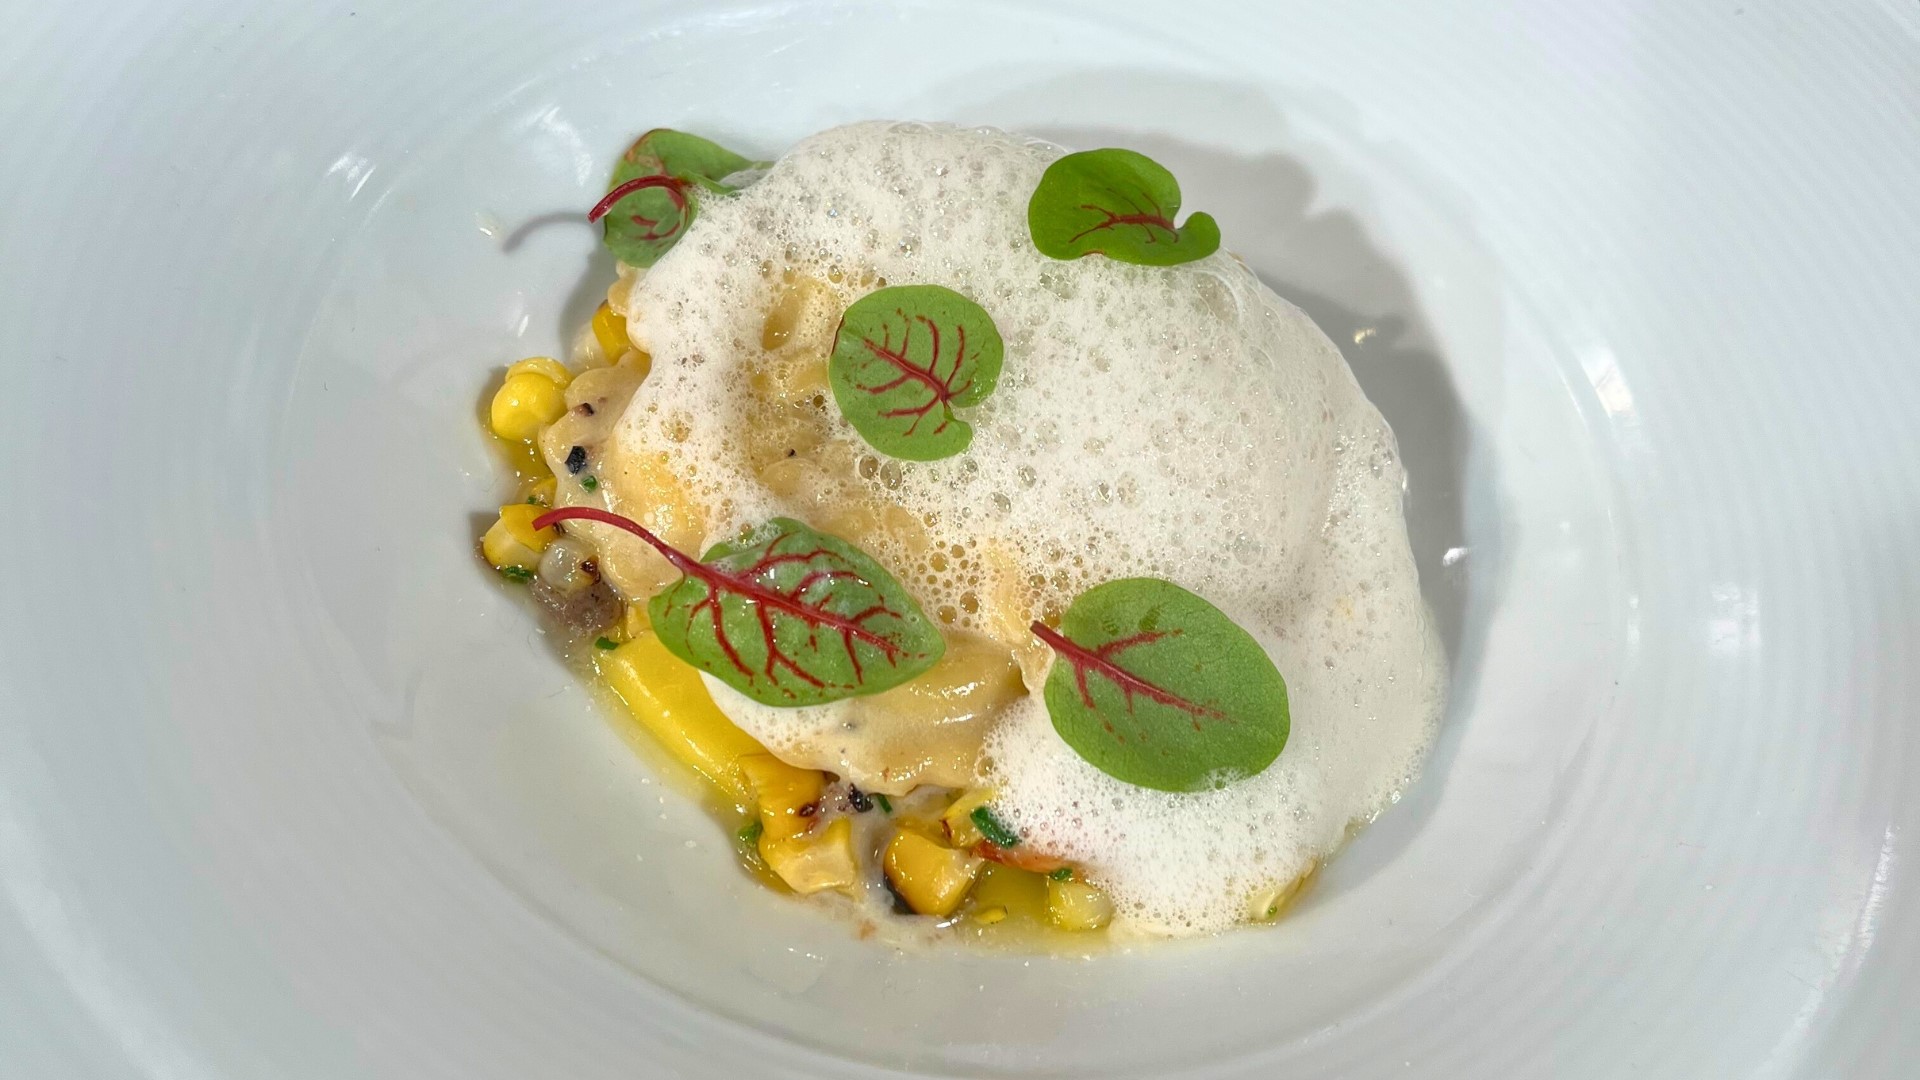 Enjoy a 5-star dinner at home with this delicious corn raviolini recipe.